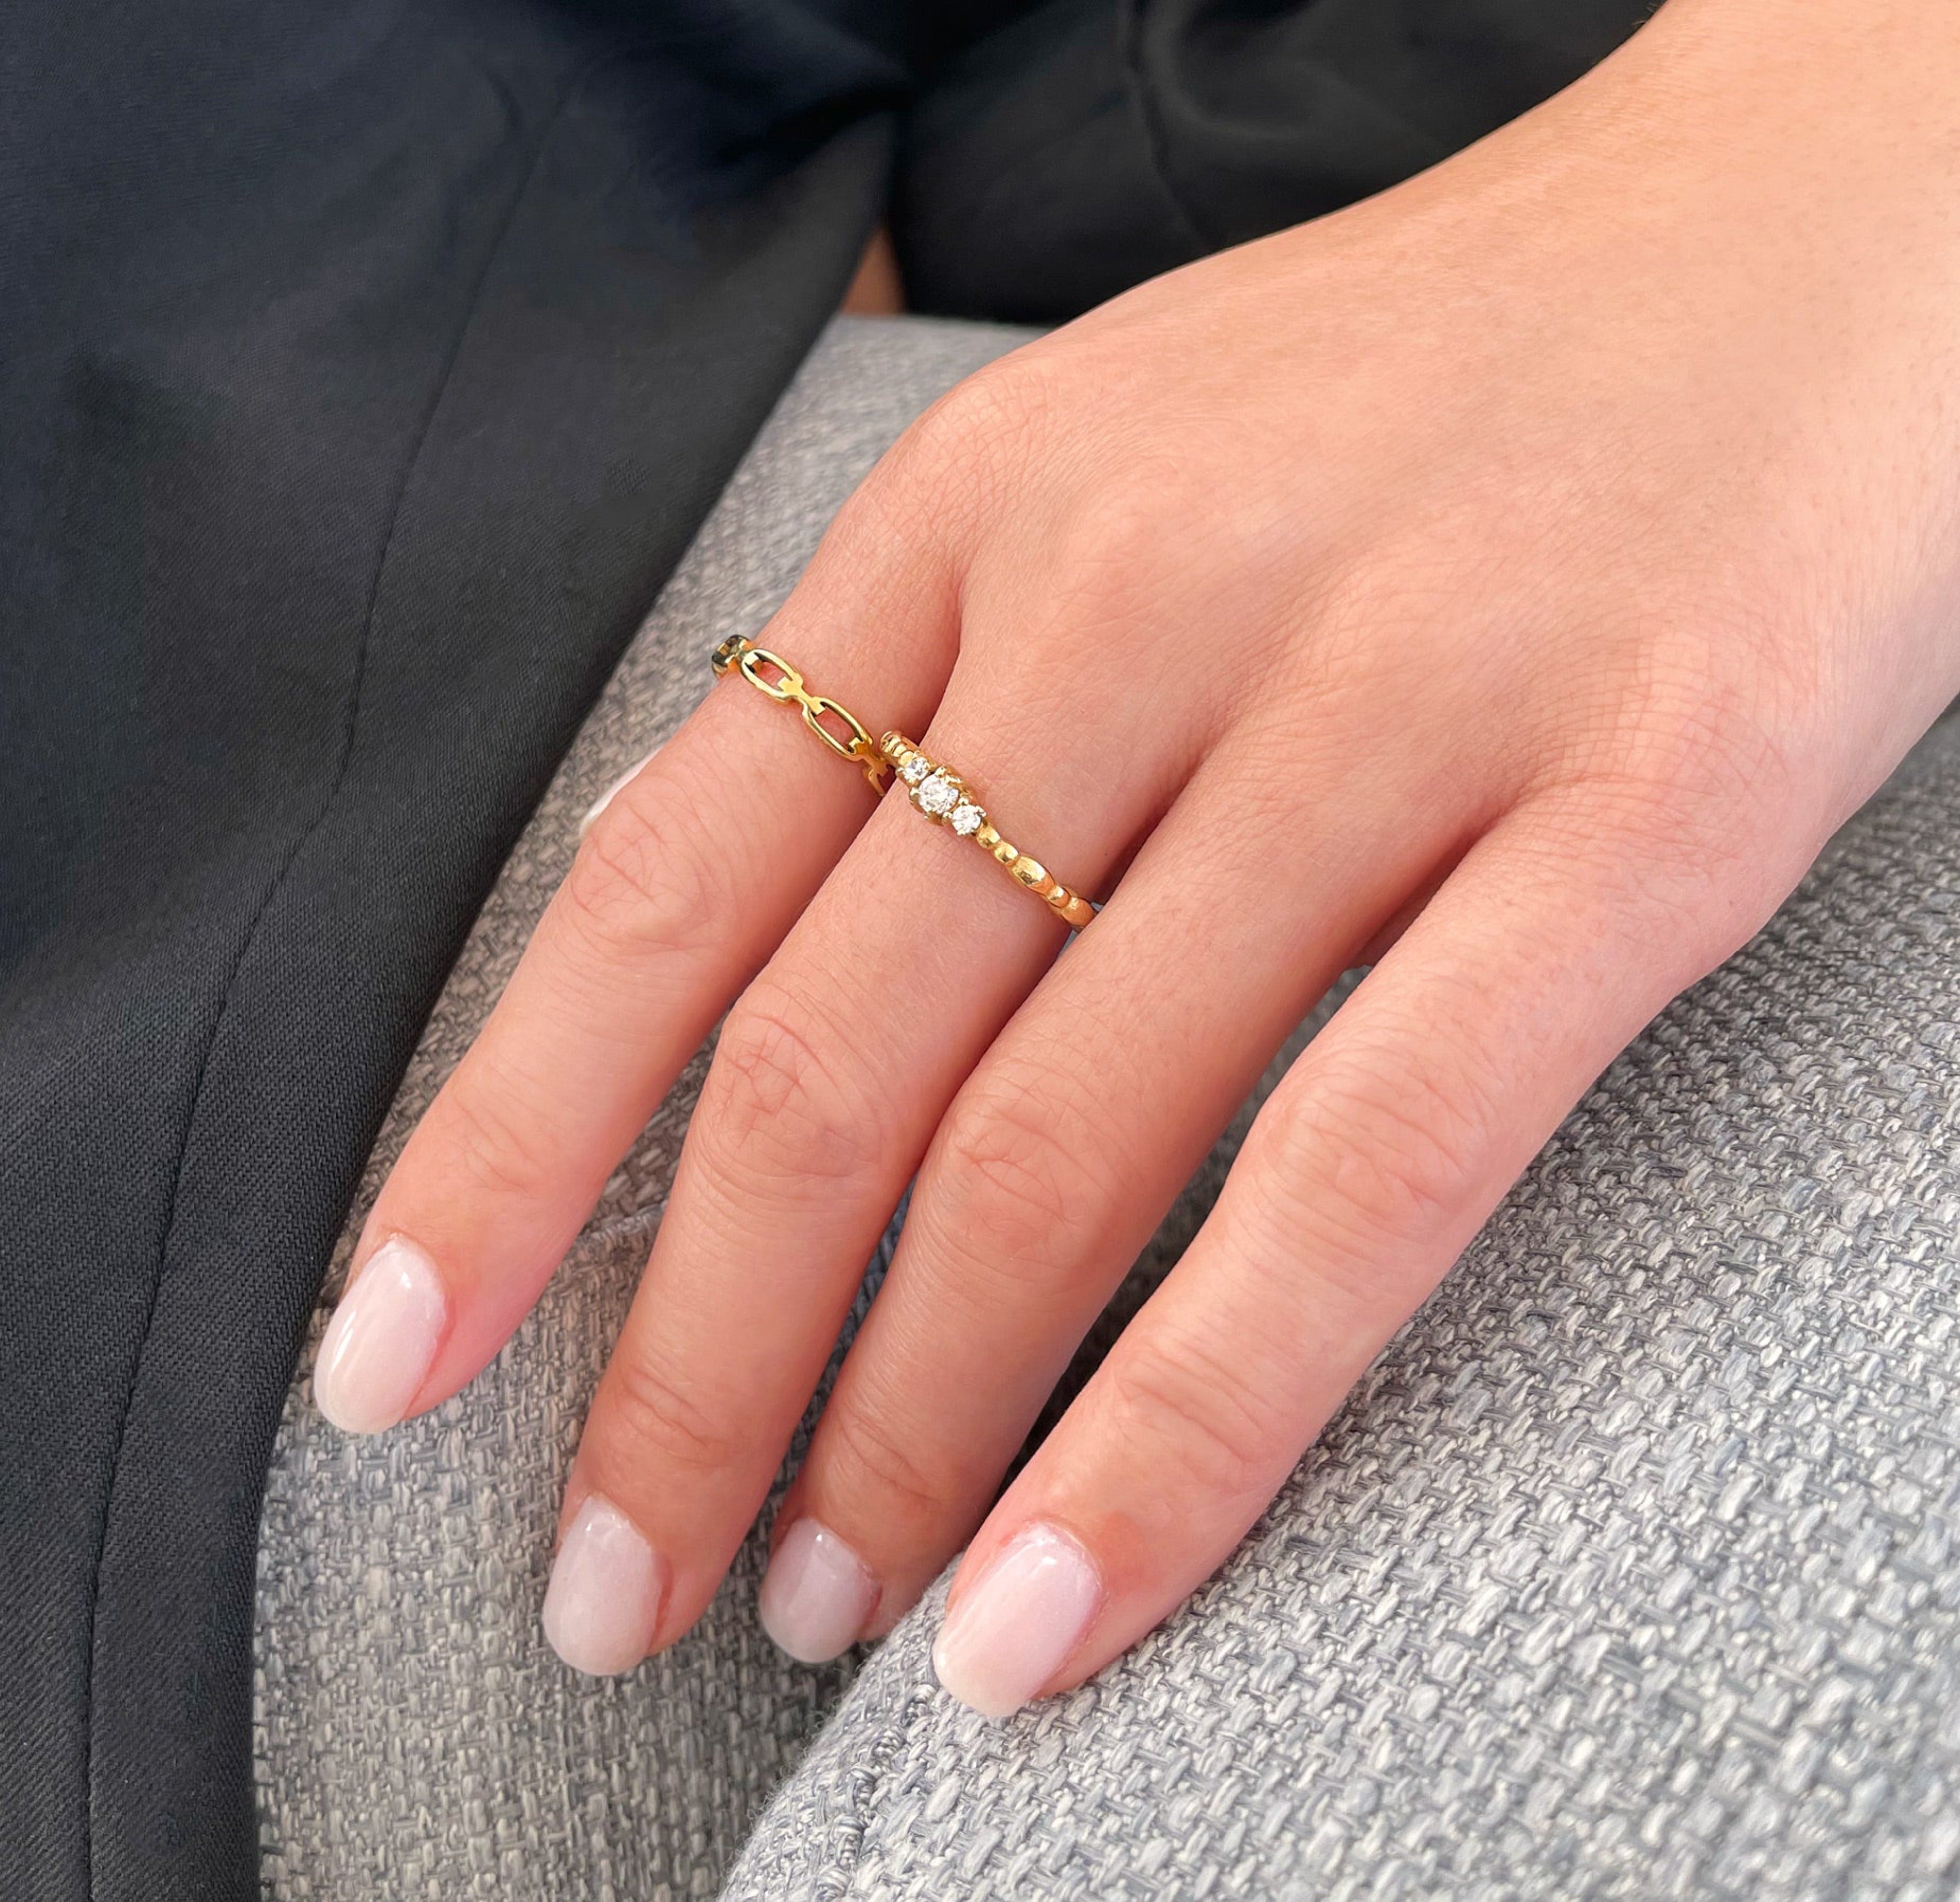 Celeste gold dainty trim stone ring paired with Bebe thin chain ring.  Waterproof jewelry